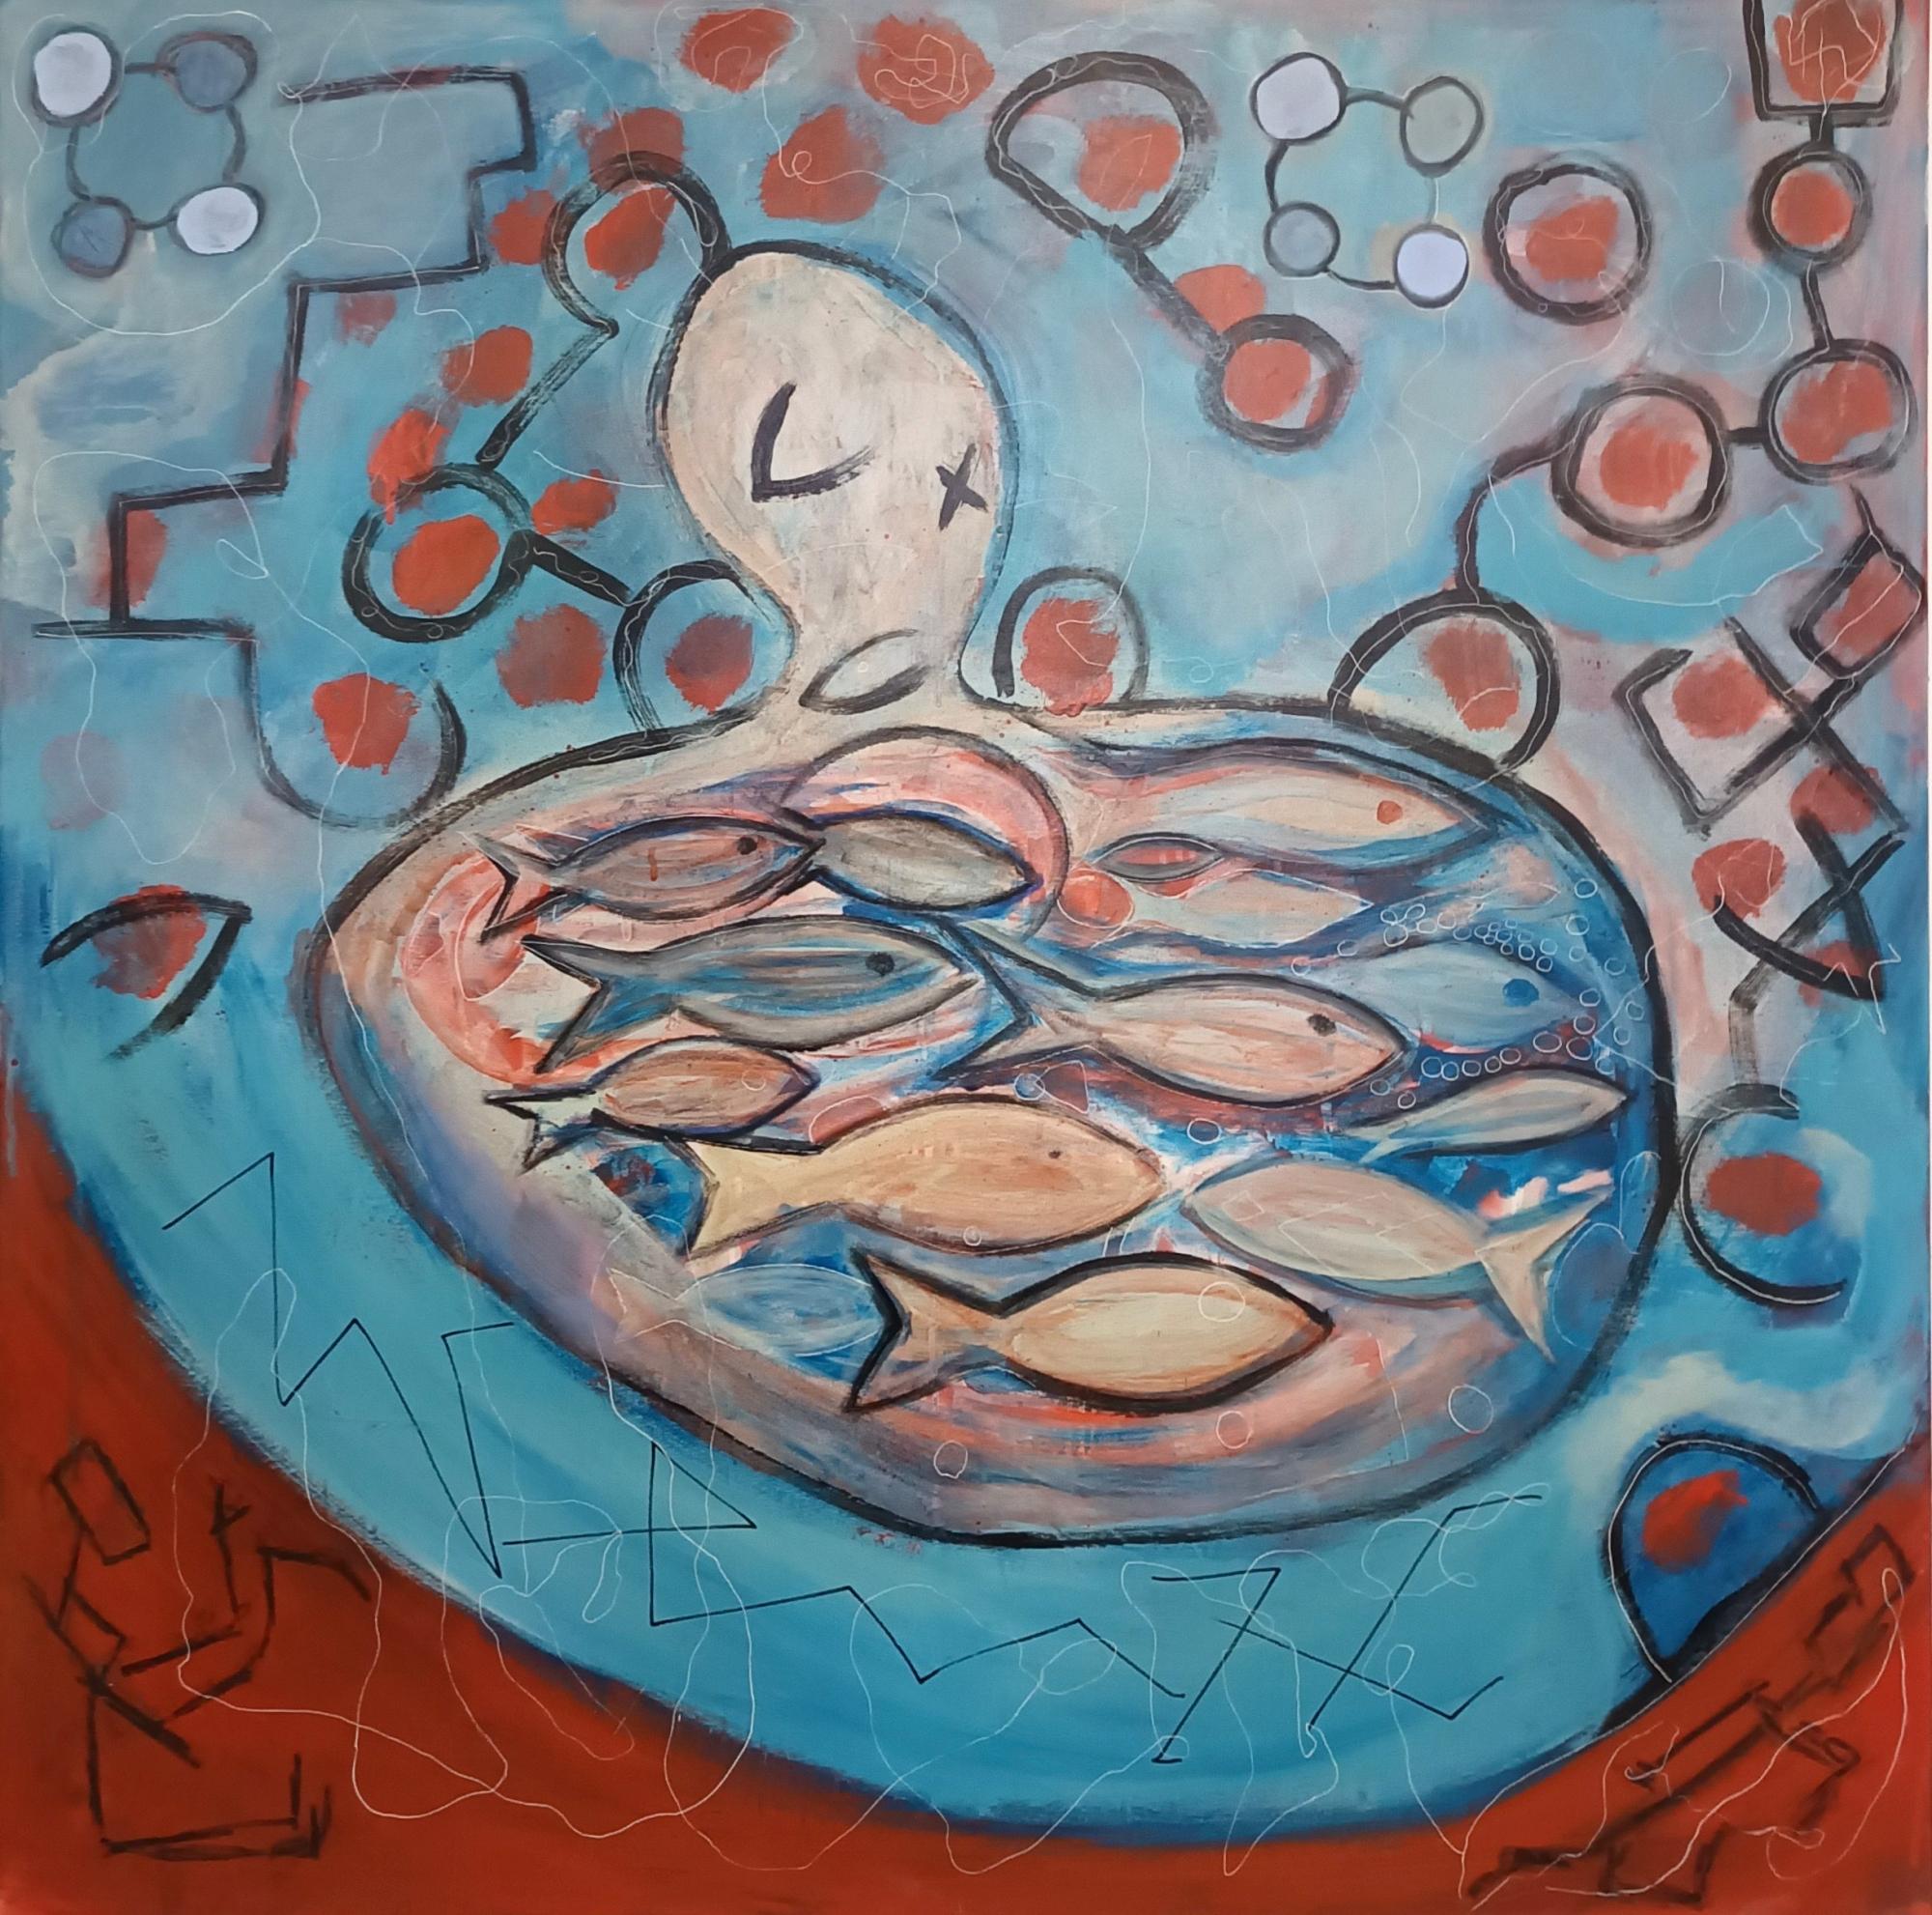 "Il Mare Dentro" by Enzio Wenk, 2020 -Acrylic on Canvas, NeoExpressionism